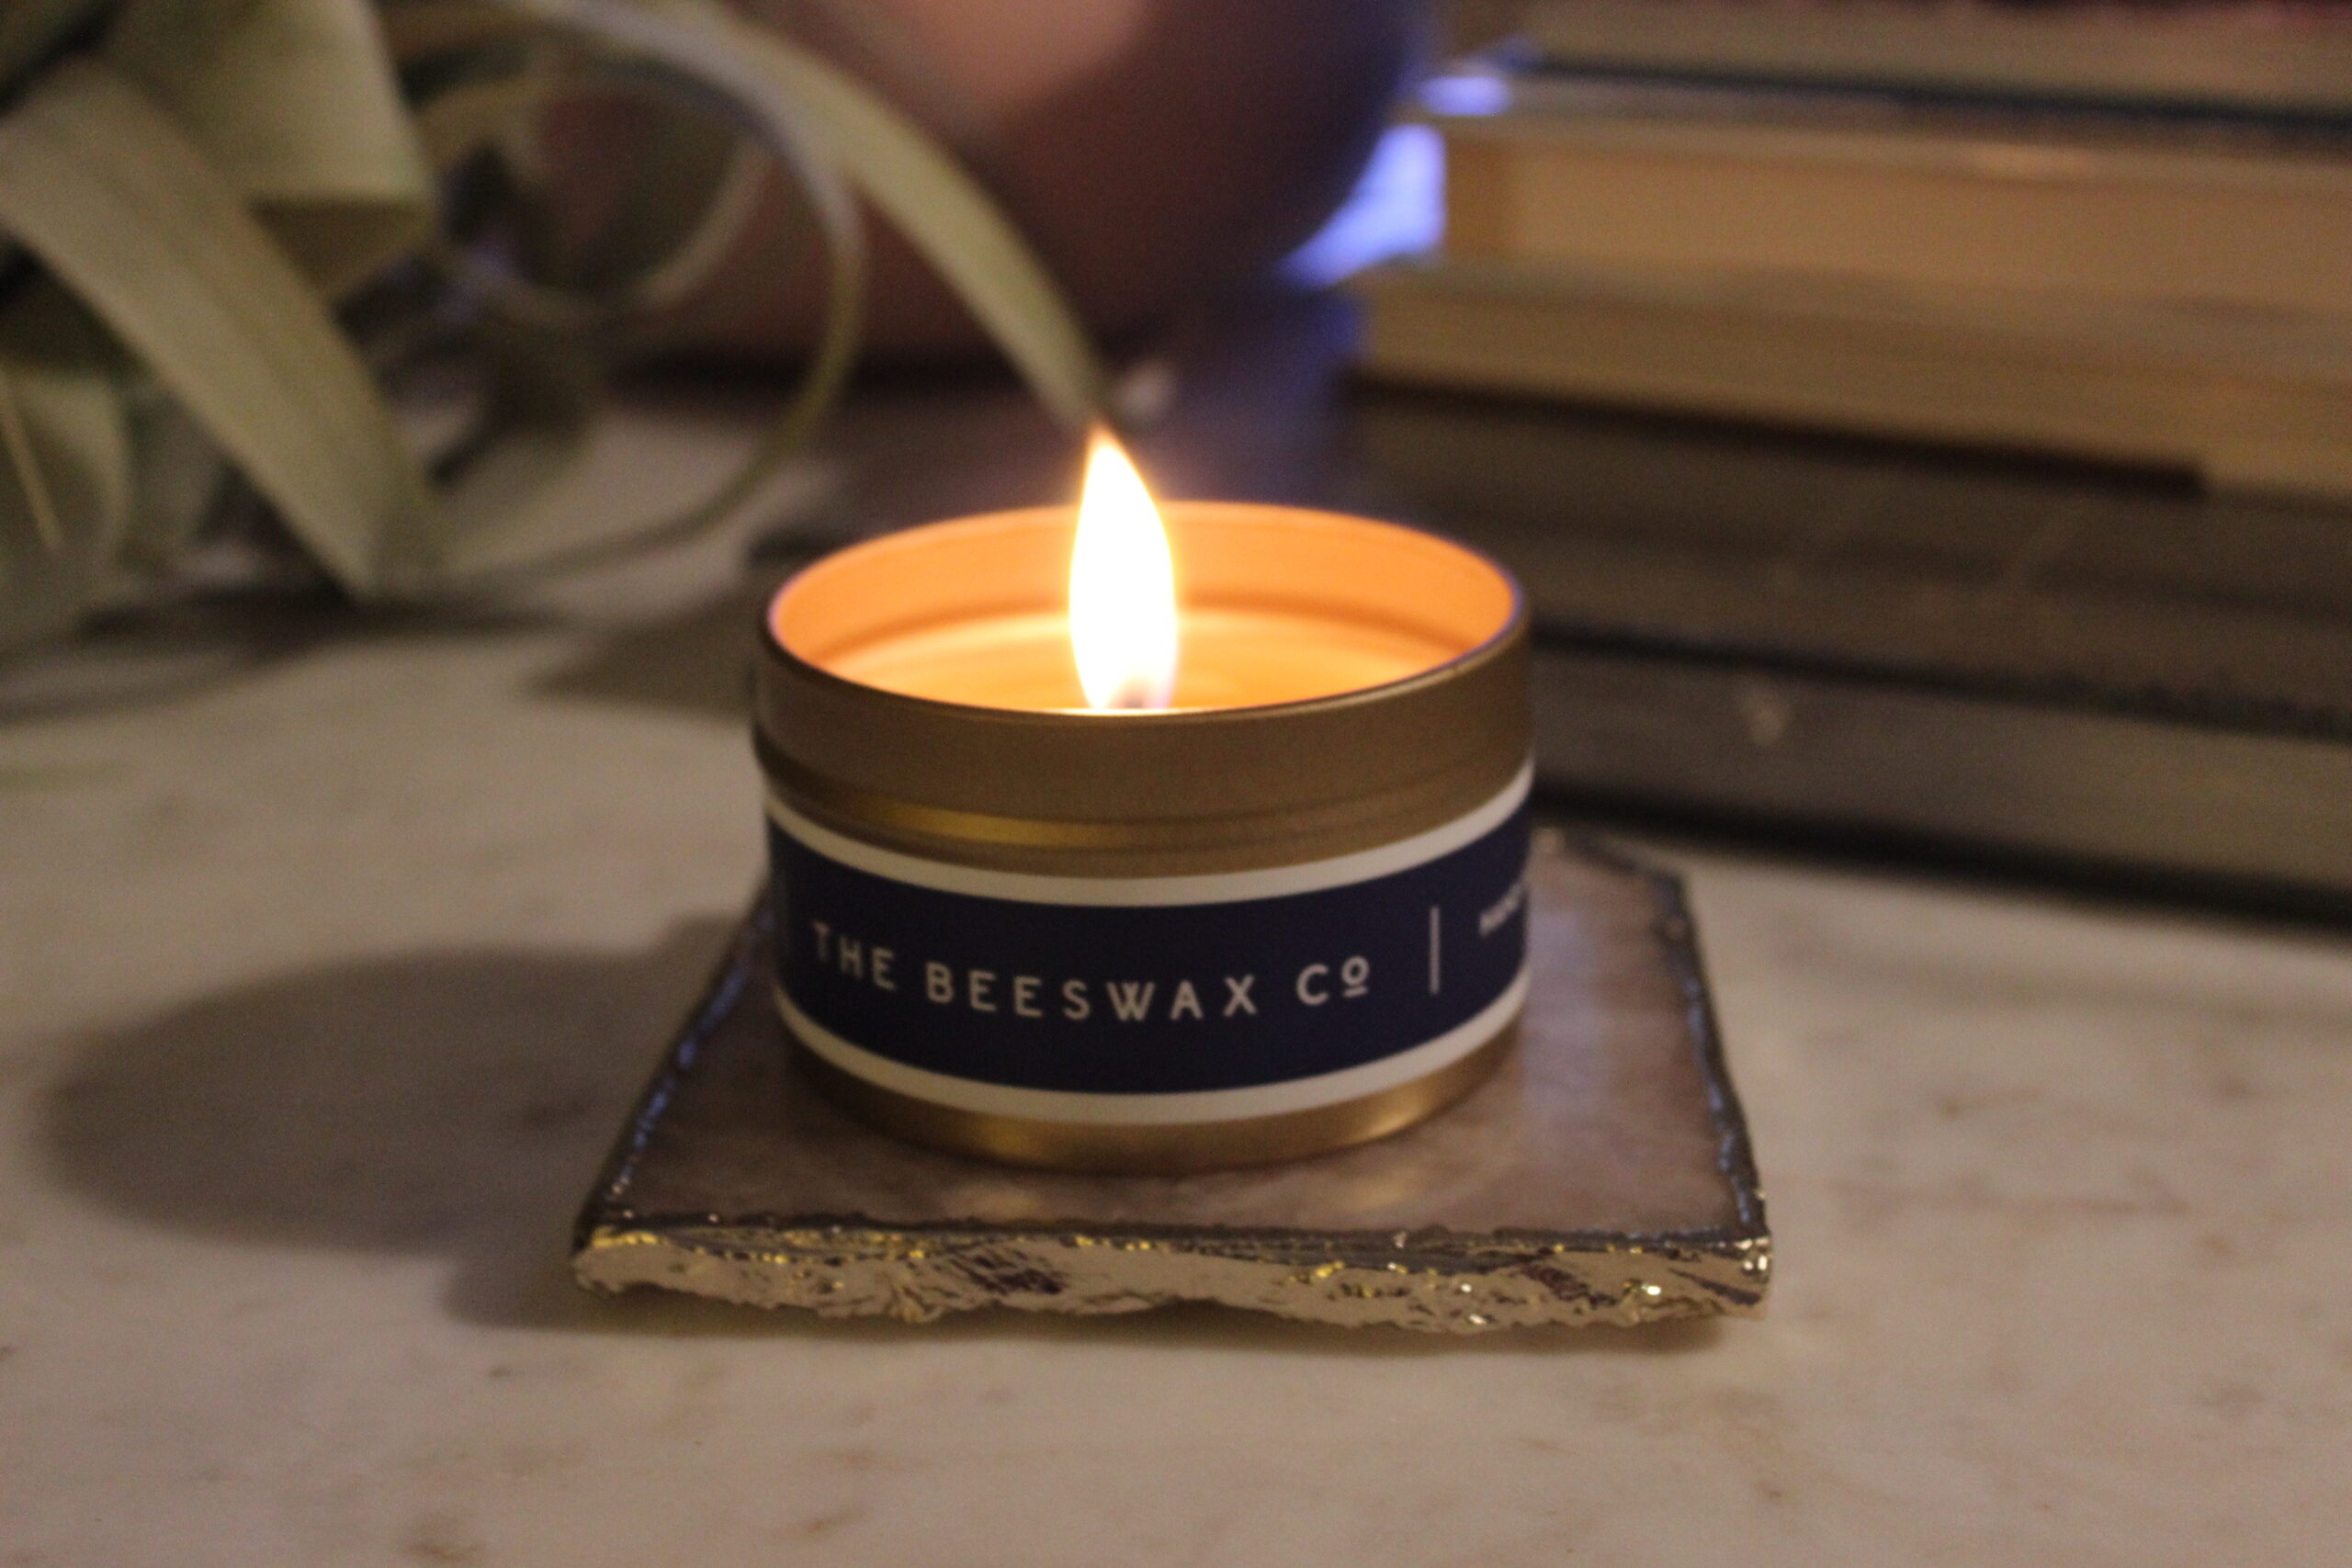 The Beeswax Co.